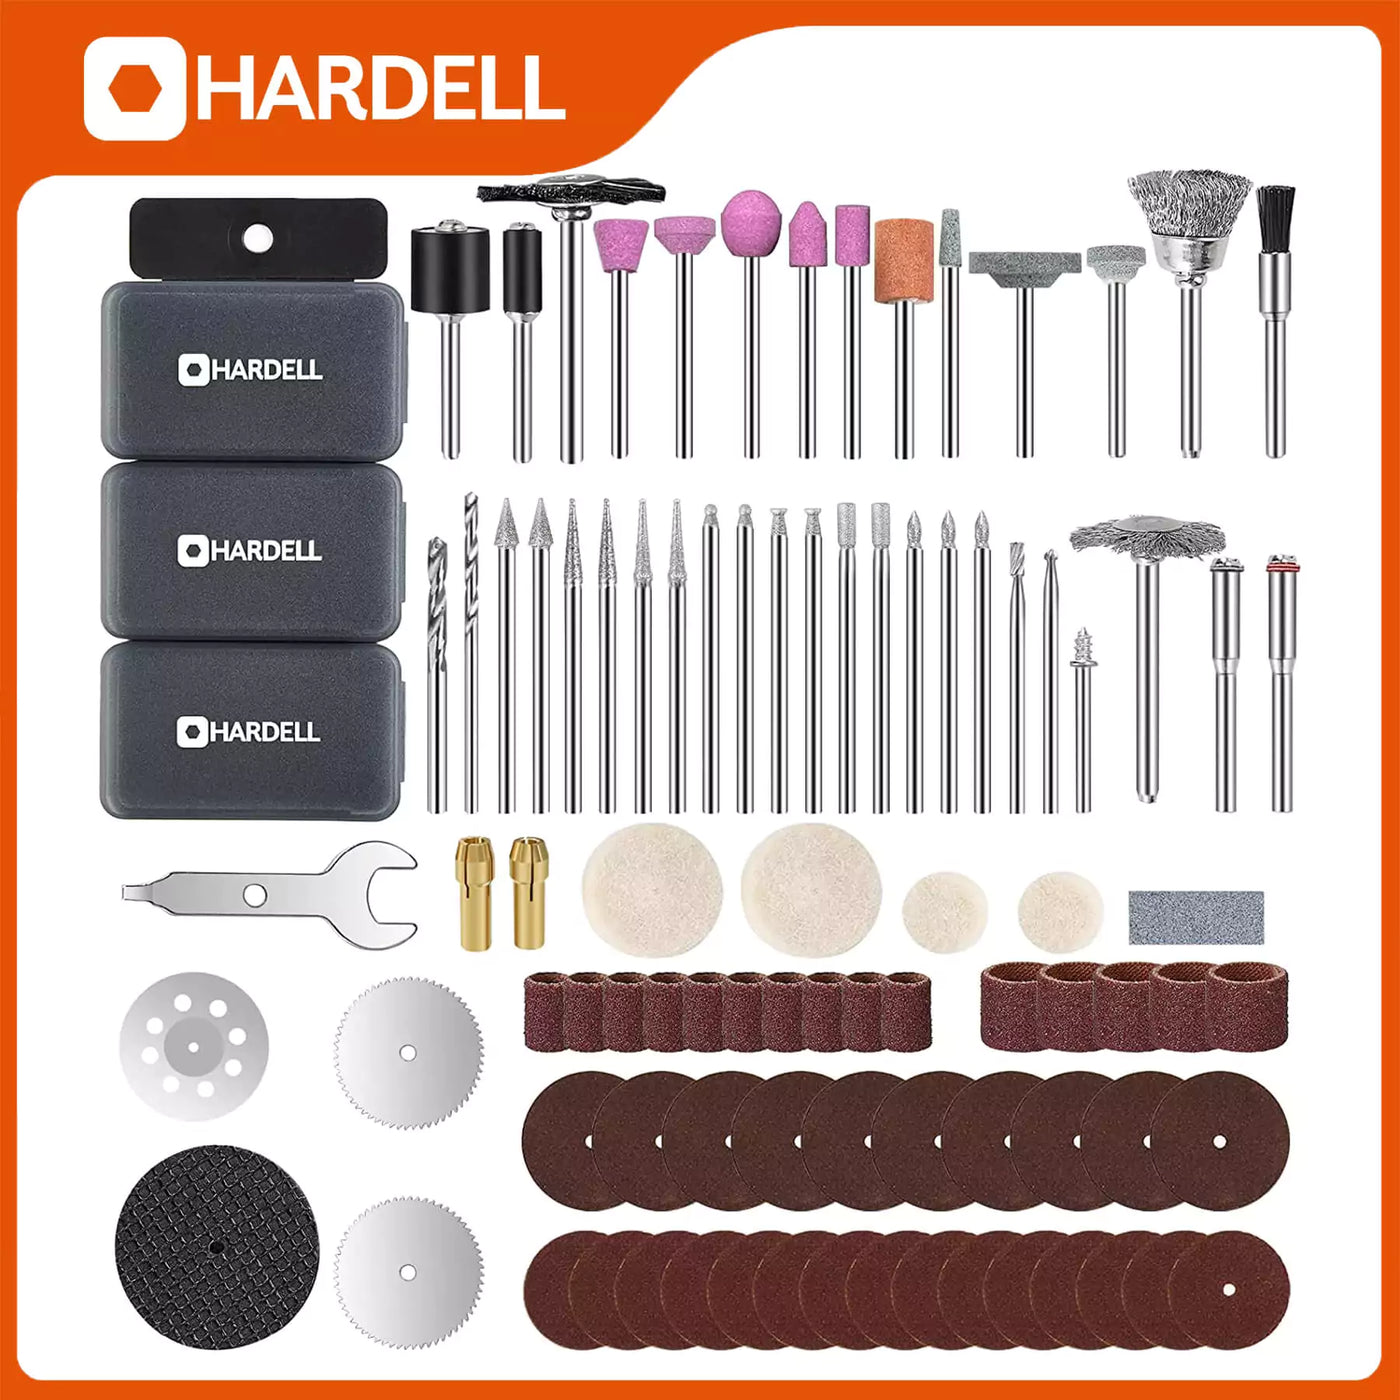 HARDELL_90_Pcs_Rotary_Tool_Accessories01